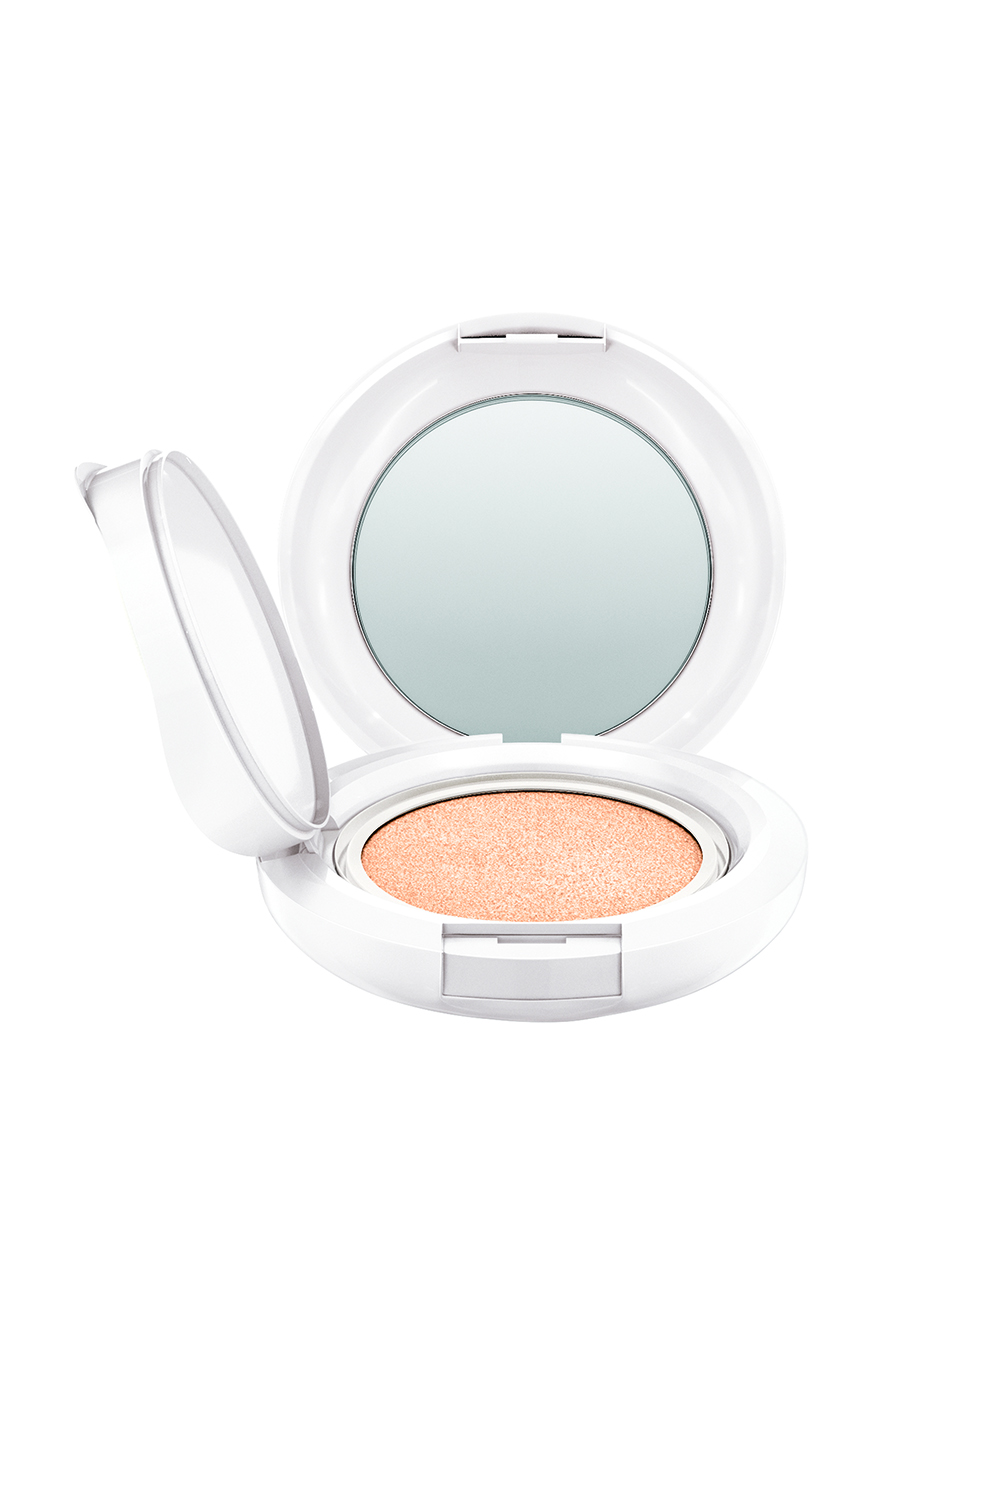 The make-up: As well as providing the perfect radiant skin finish on-the-go, M.A.C Lightful C SPF50 Quick Finish Compact, $75, is boosted with brightening marine extracts and vitamin C.